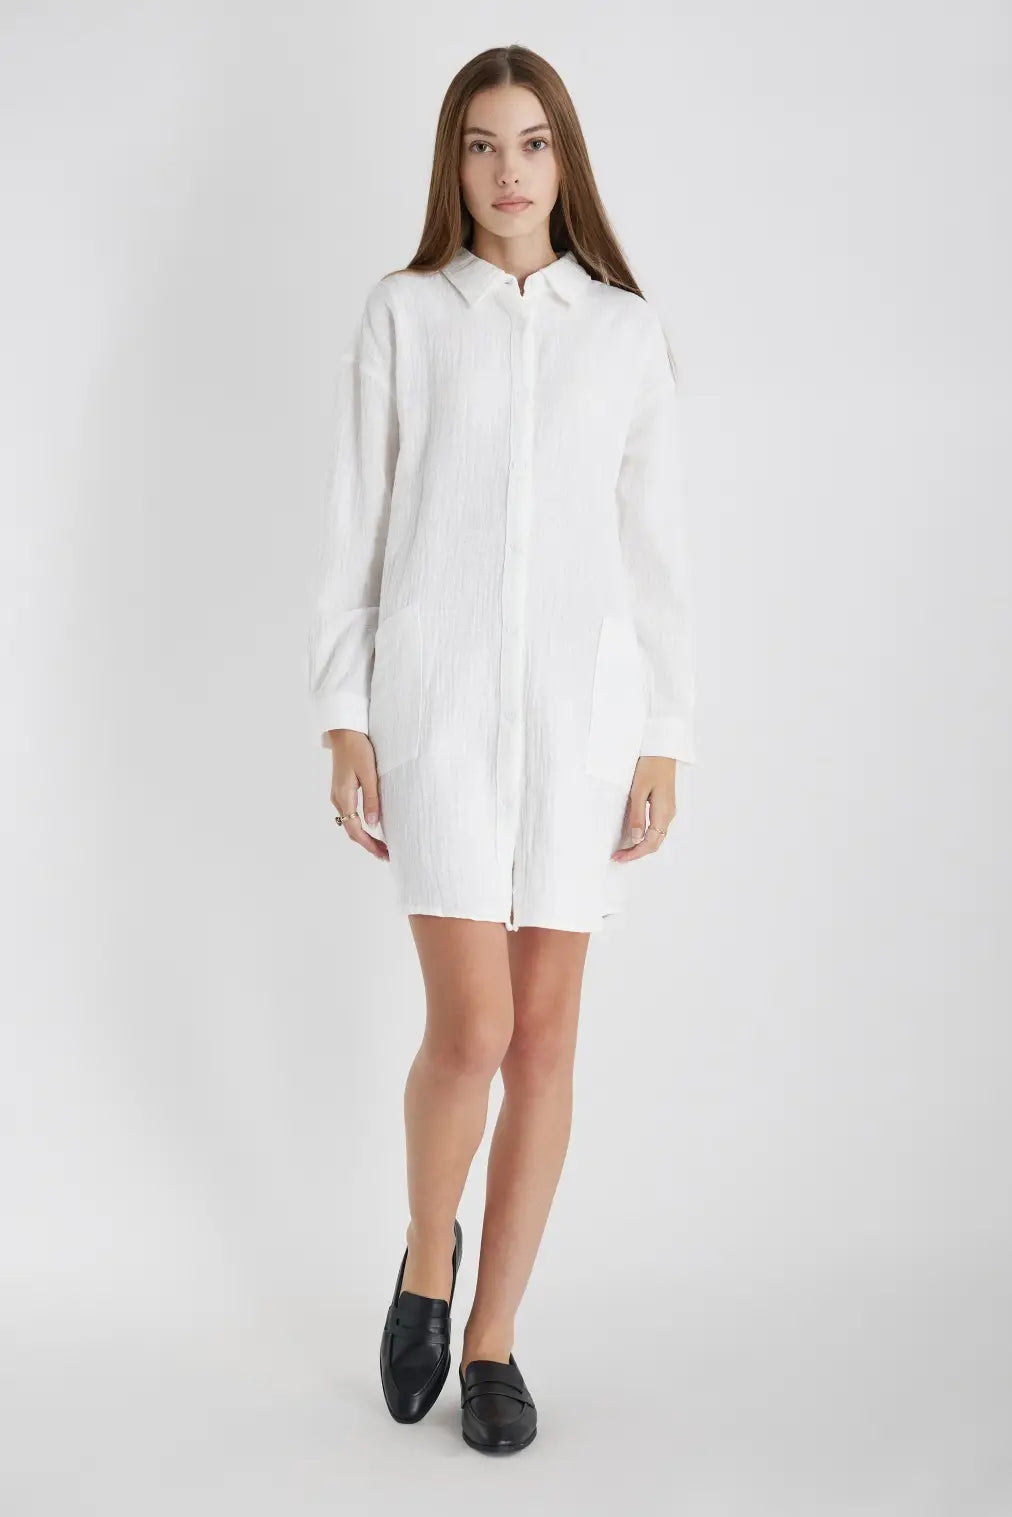 When you need a little room to breathe. The Diana Shirt Dress is an oversized button-down dress constructed of lightweight double gauze cotton. Detailed with side pockets for added interest. Style over stockings with a winter coat for cold temperatures and transition into your spring and summer wardrobe with sandals and a sun hat. 